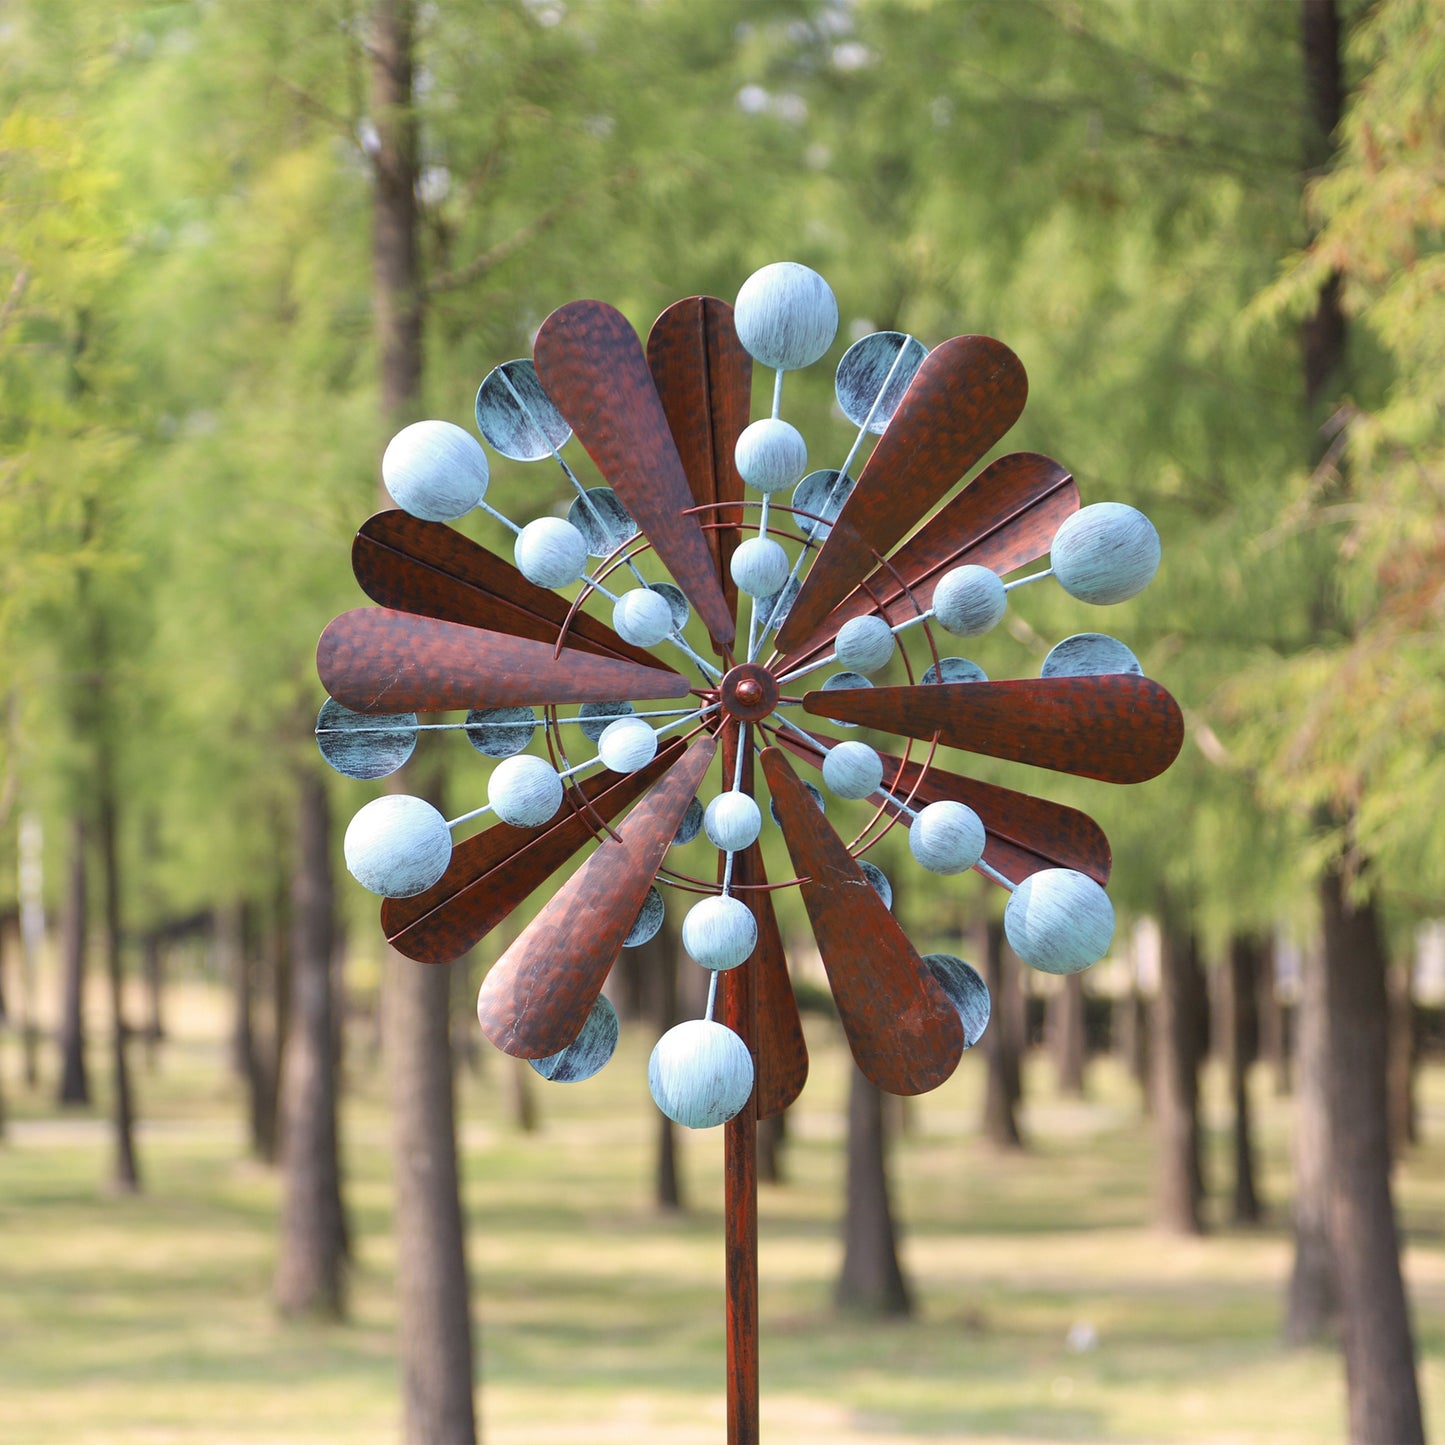 Lovetti Unique and Magical Metal Windmill-Kinetic Metal Wind Spinners with Metal Garden Stake